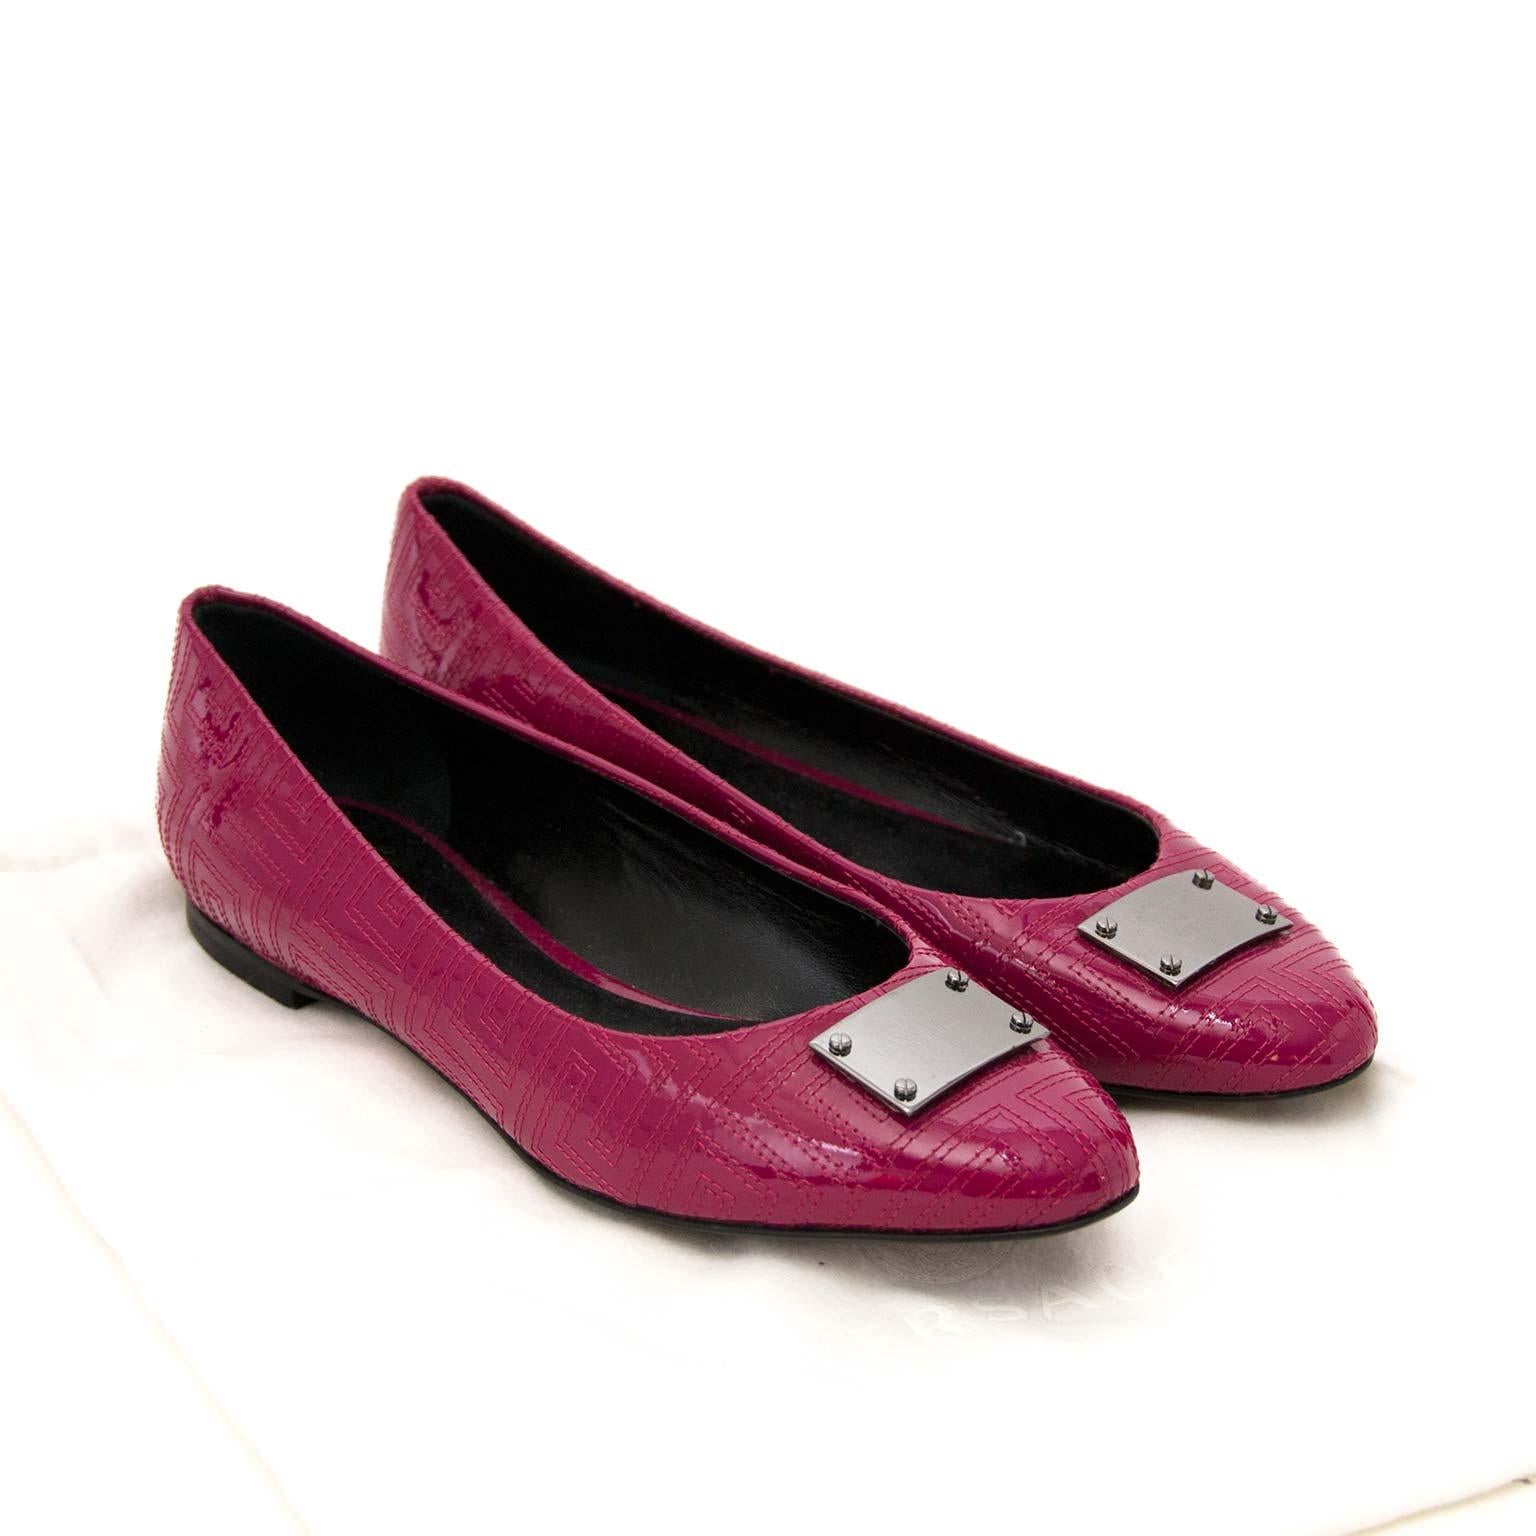 Gianni Versace Couture Patent Fuchsia Ballerinas - size 37, 5 In New Condition For Sale In Antwerp, BE